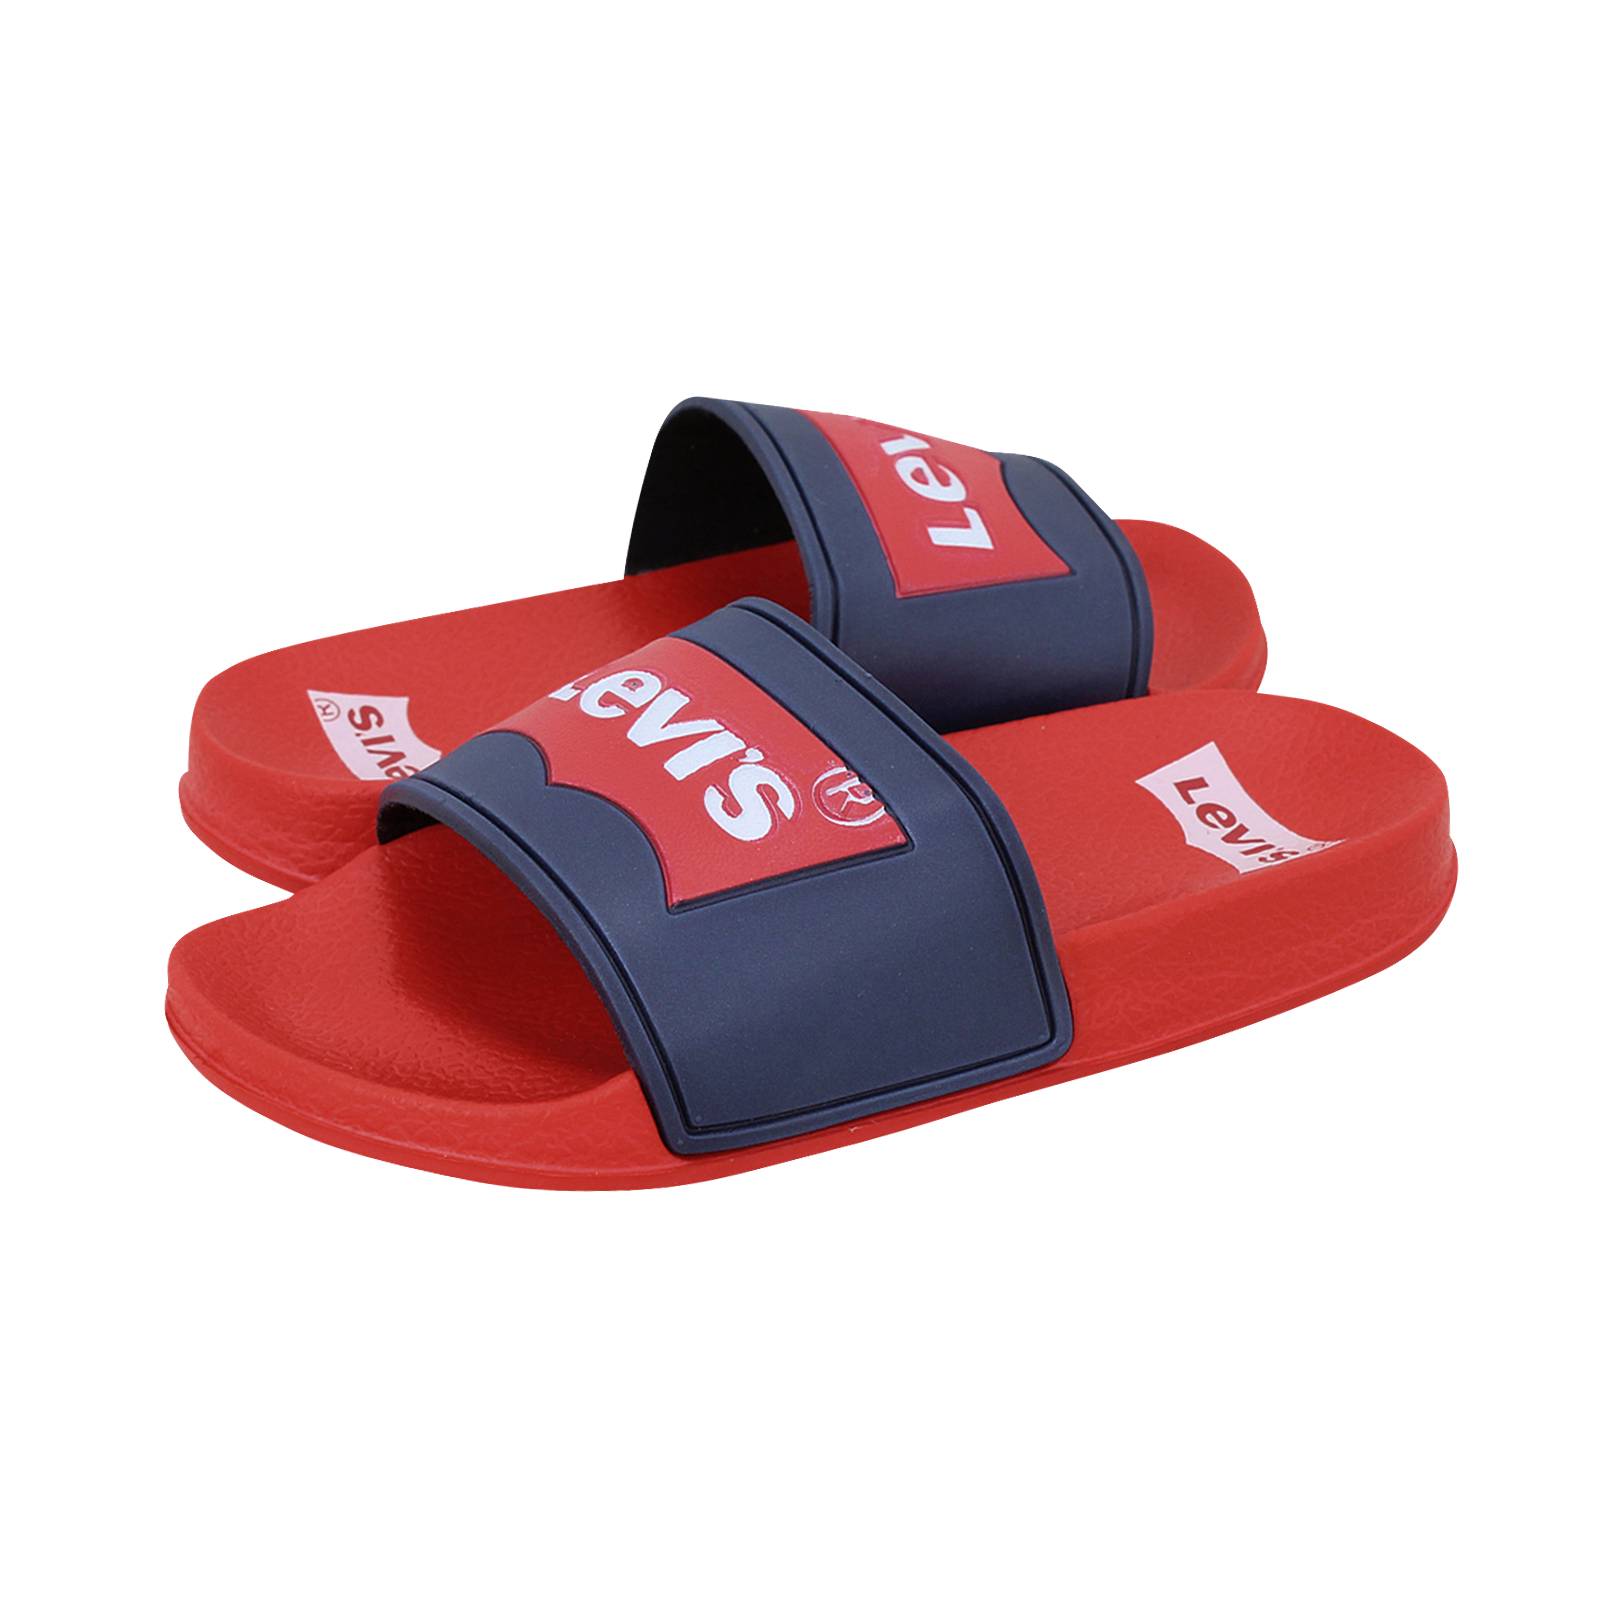 Pool S - Levi's Kids' sandals made of synthetic - Gianna Kazakou Online